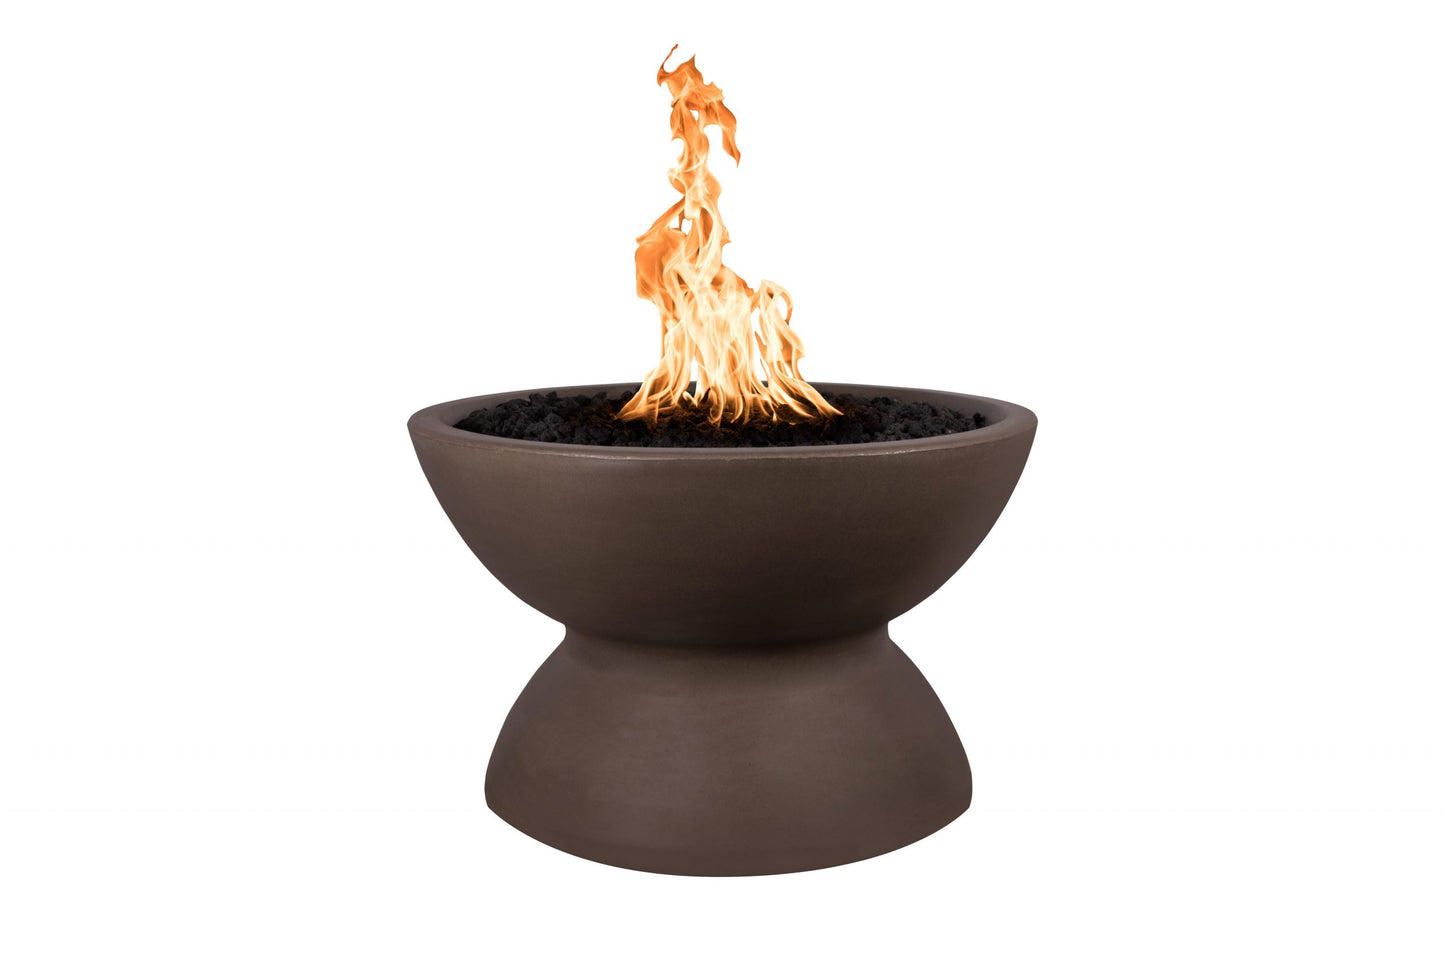 The Outdoor Plus Round Copa 33" Metallic Slate GFRC Concrete Liquid Propane Fire Pit with 110V Electronic Ignition